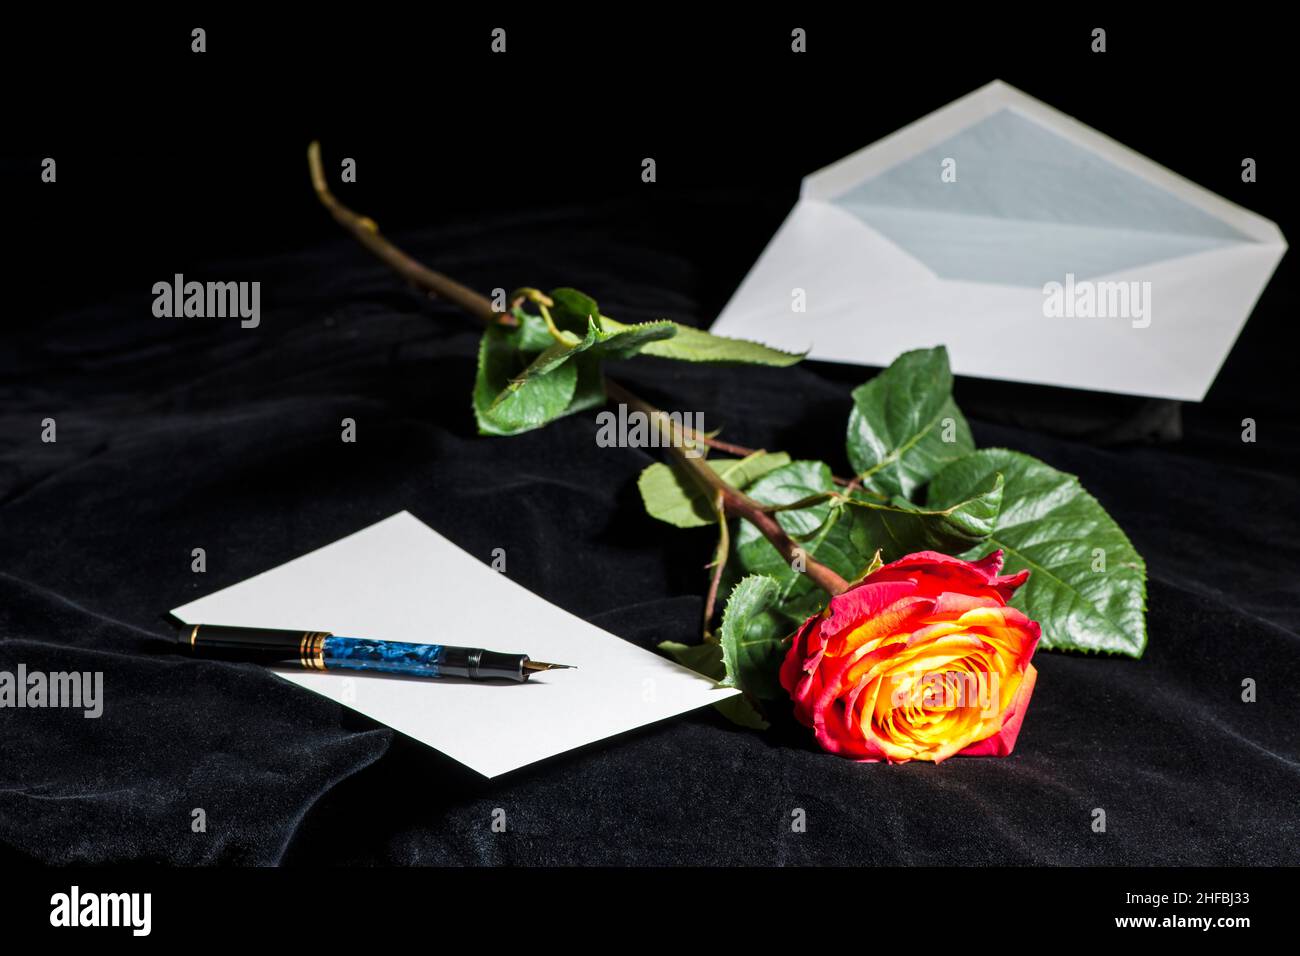 Close-up of a fiery red rose lying on black velvet with envelope and fountain pen at aperture f8. Stock Photo